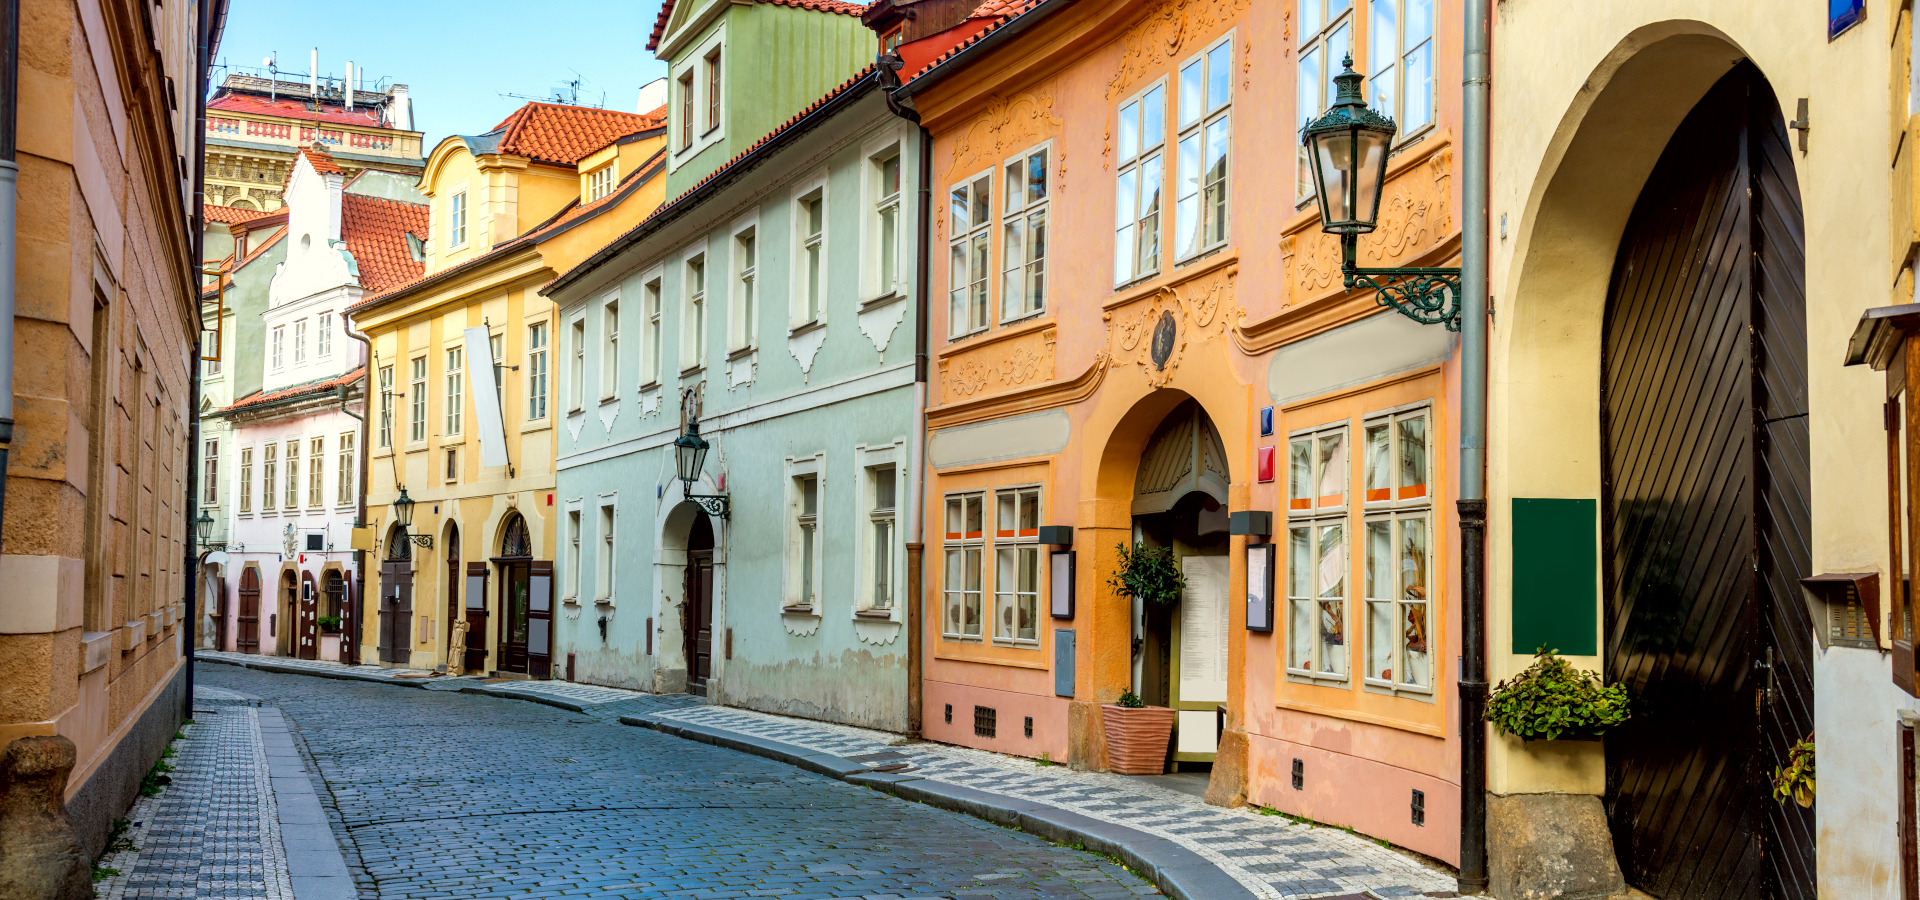 View of an alley in Prague.